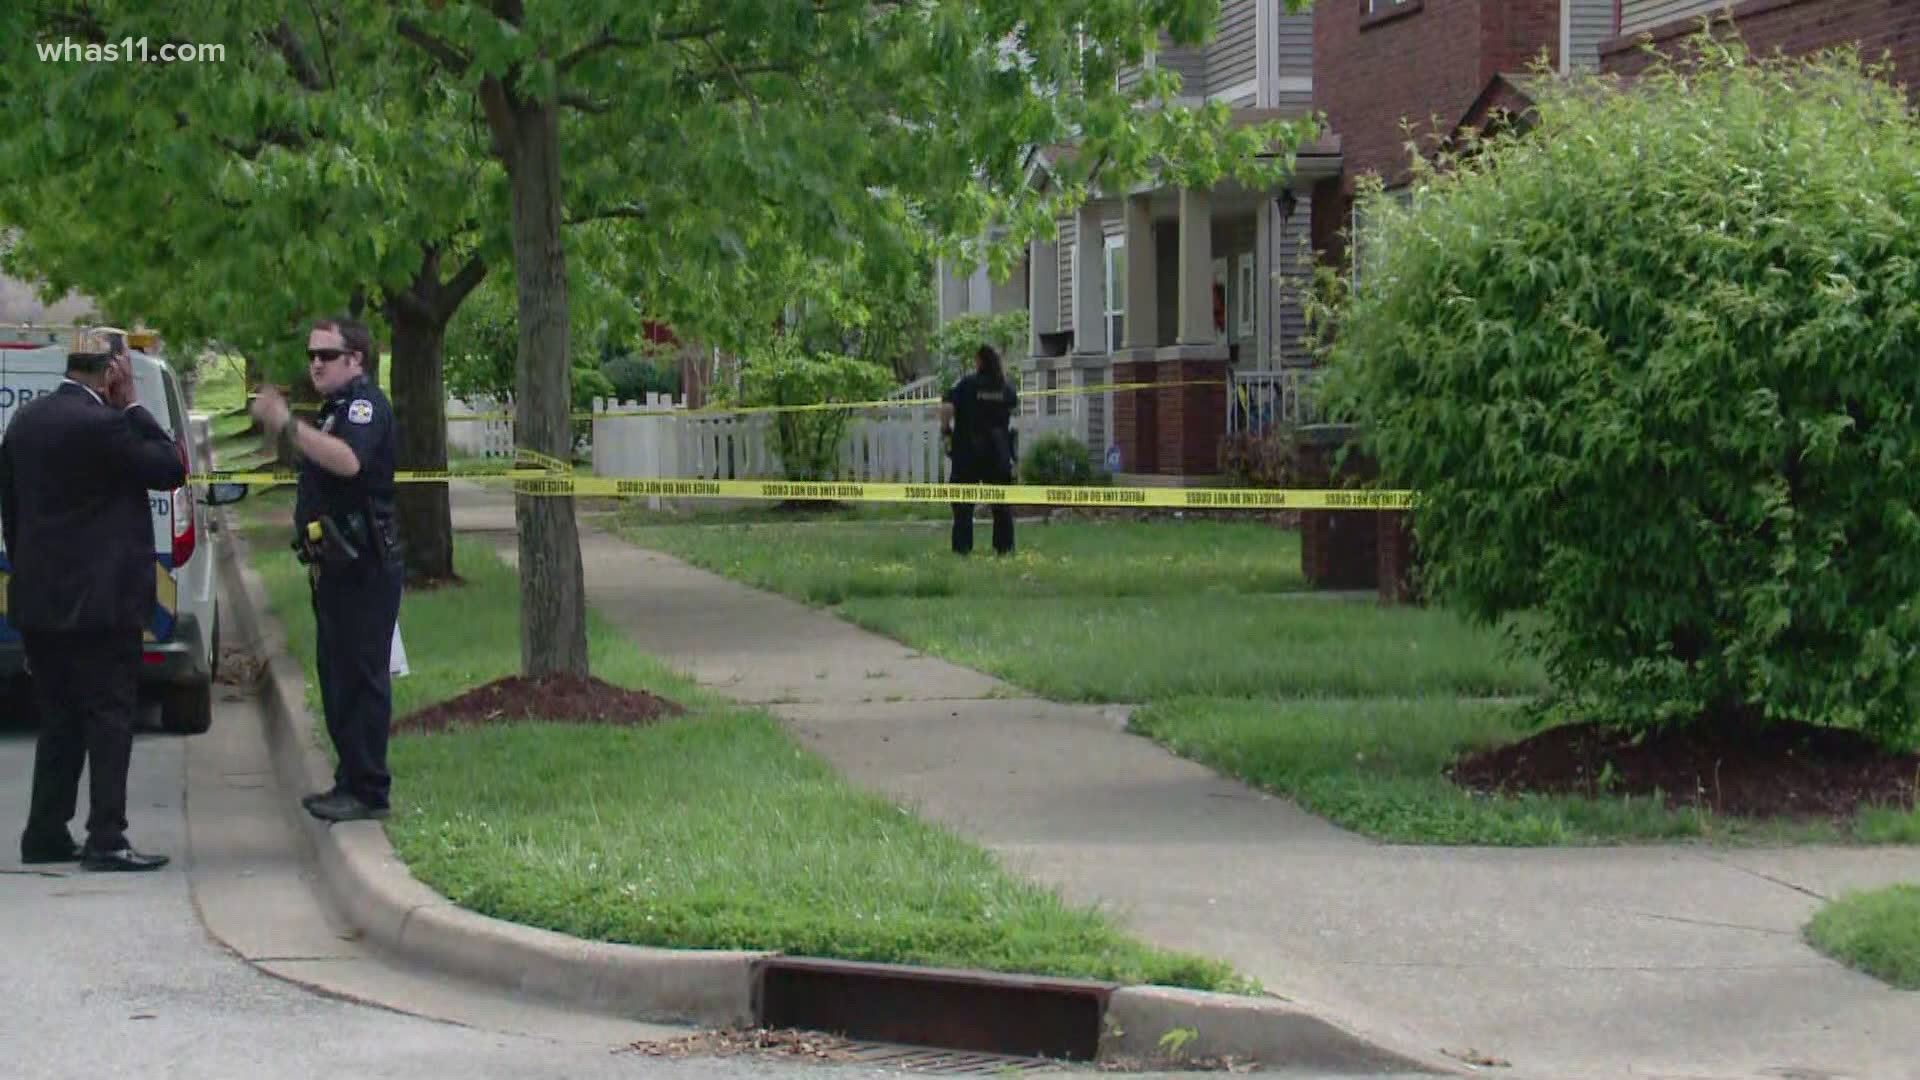 According to a release from the Louisville Metro Police Department, three people were injured in a Park Duvalle neighborhood shooting.